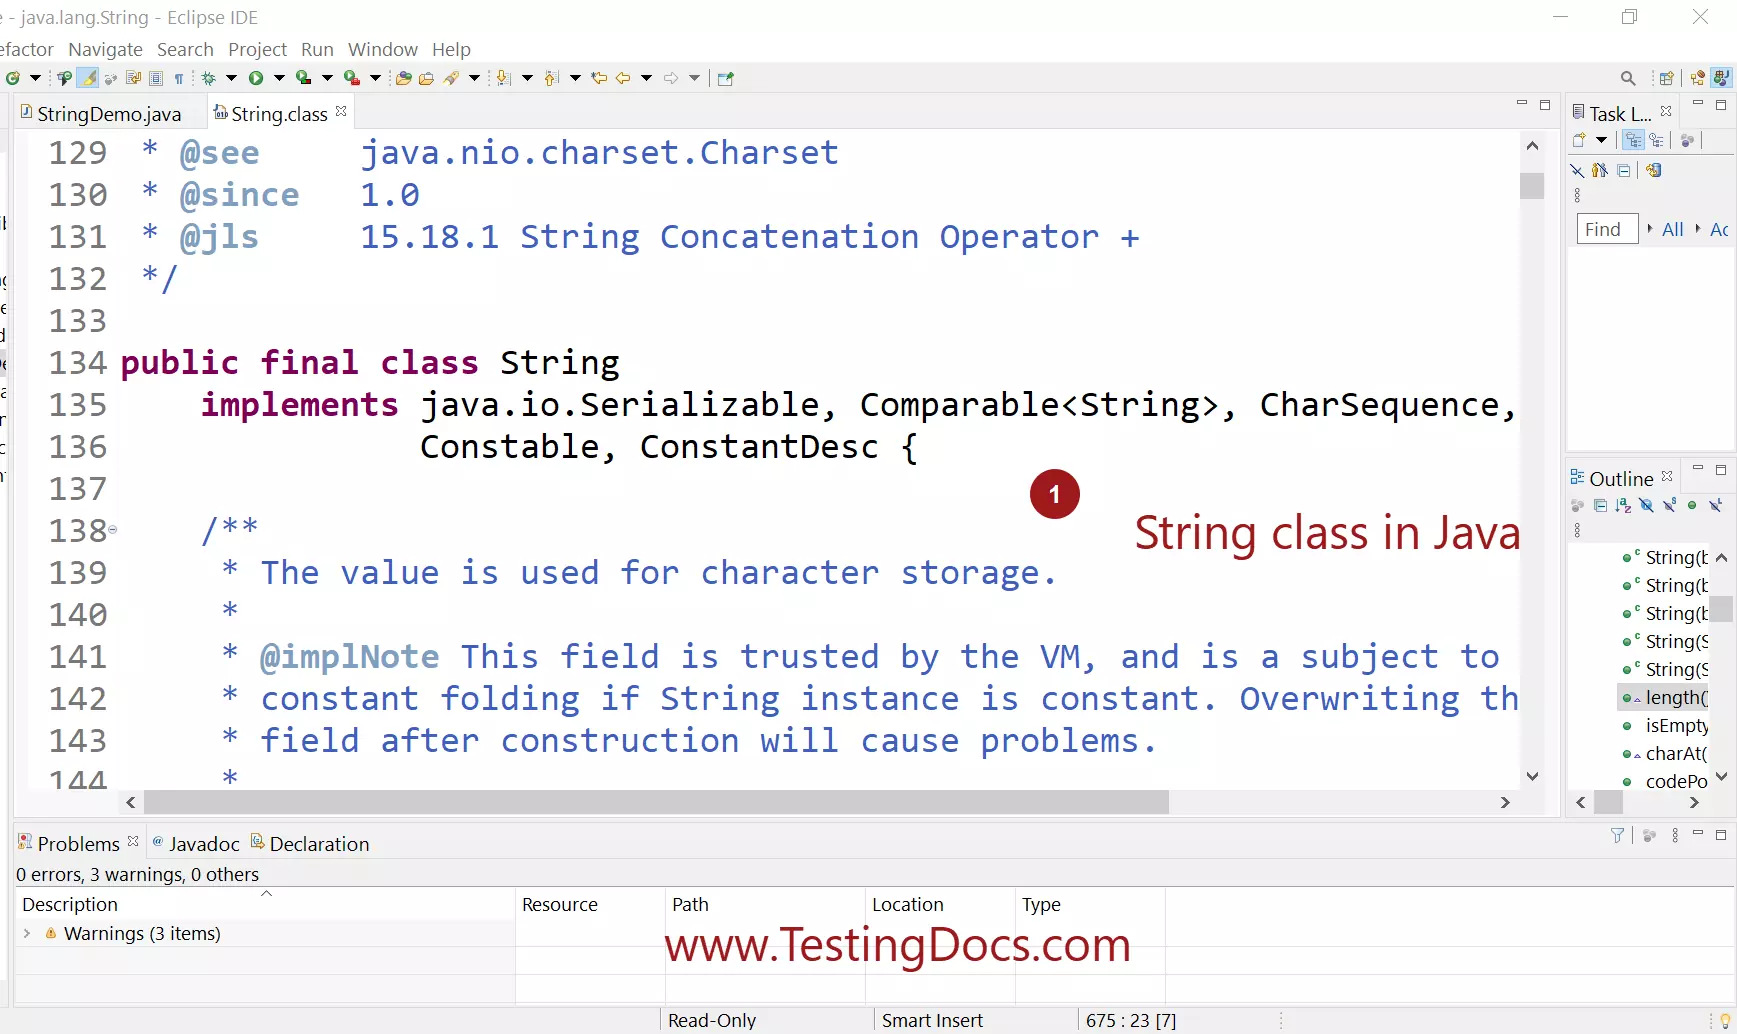 String class in Java